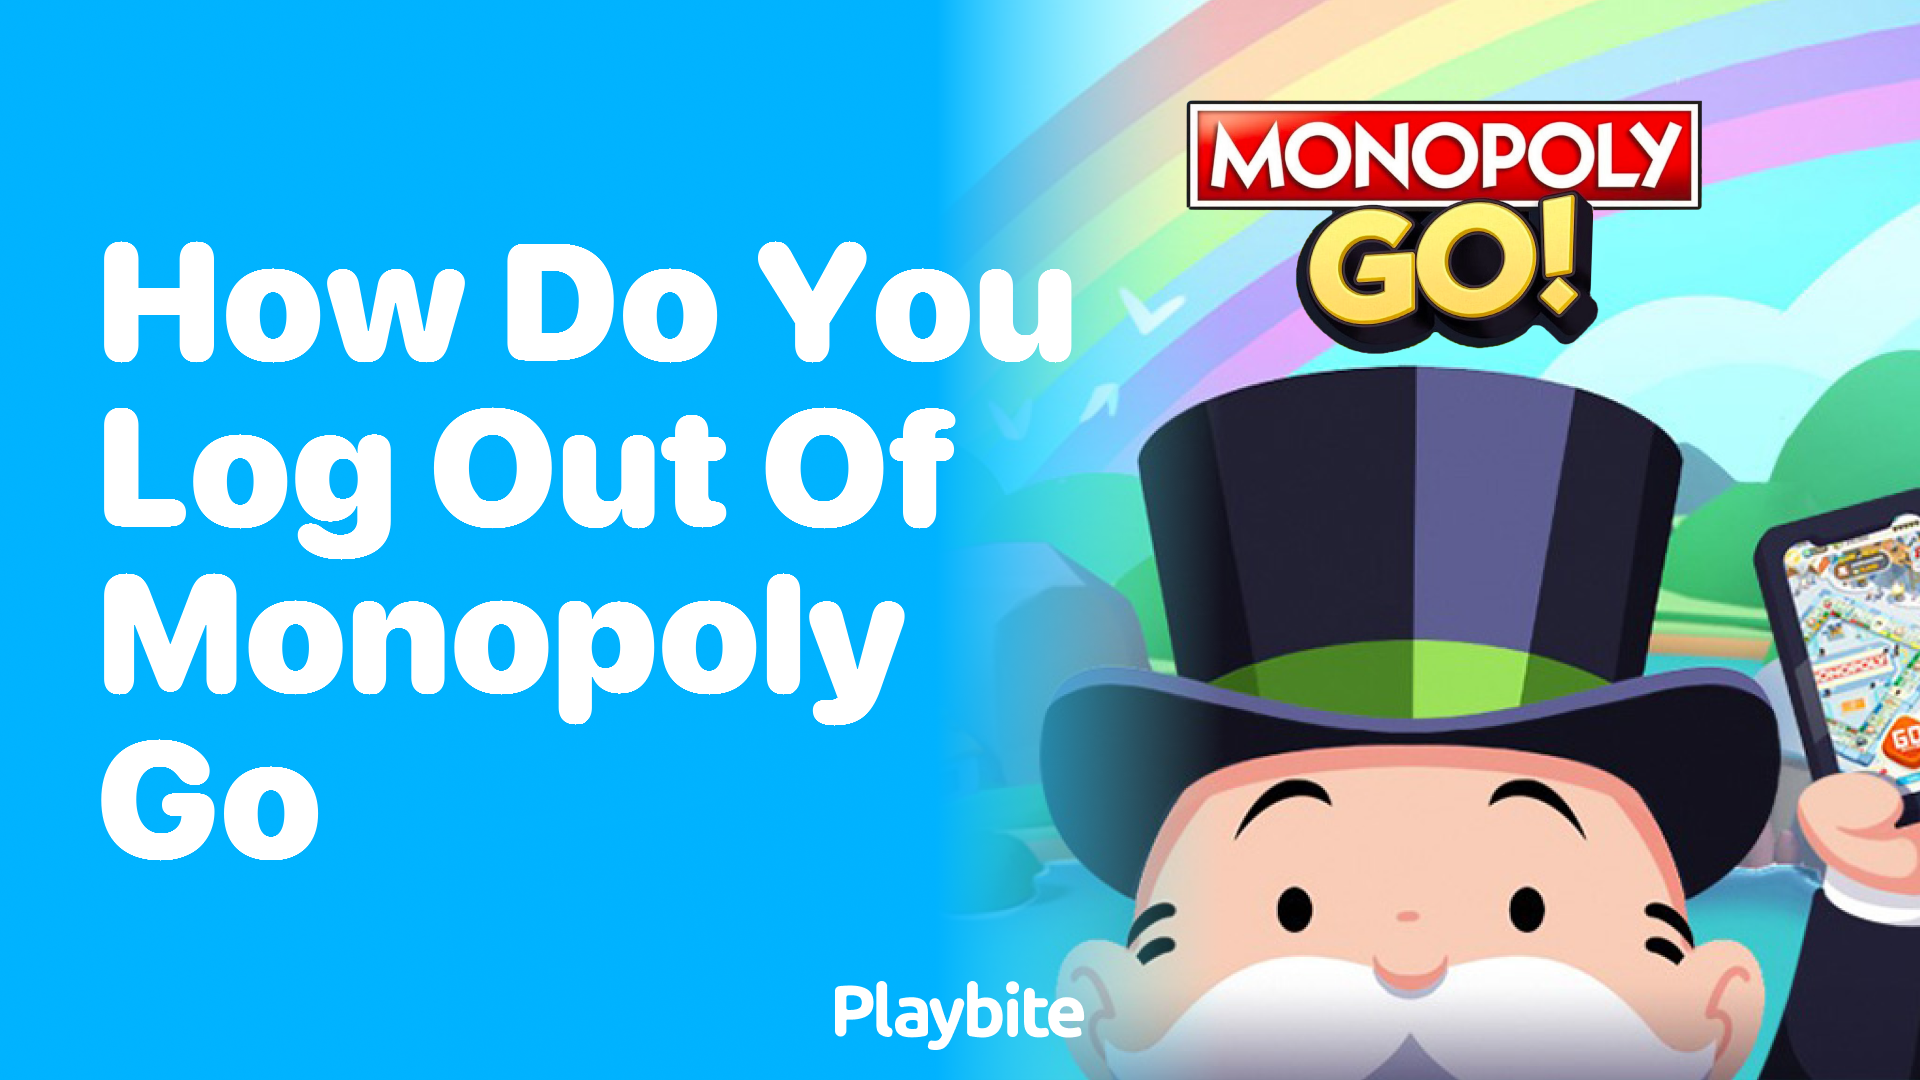 How Do You Log Out of Monopoly Go?